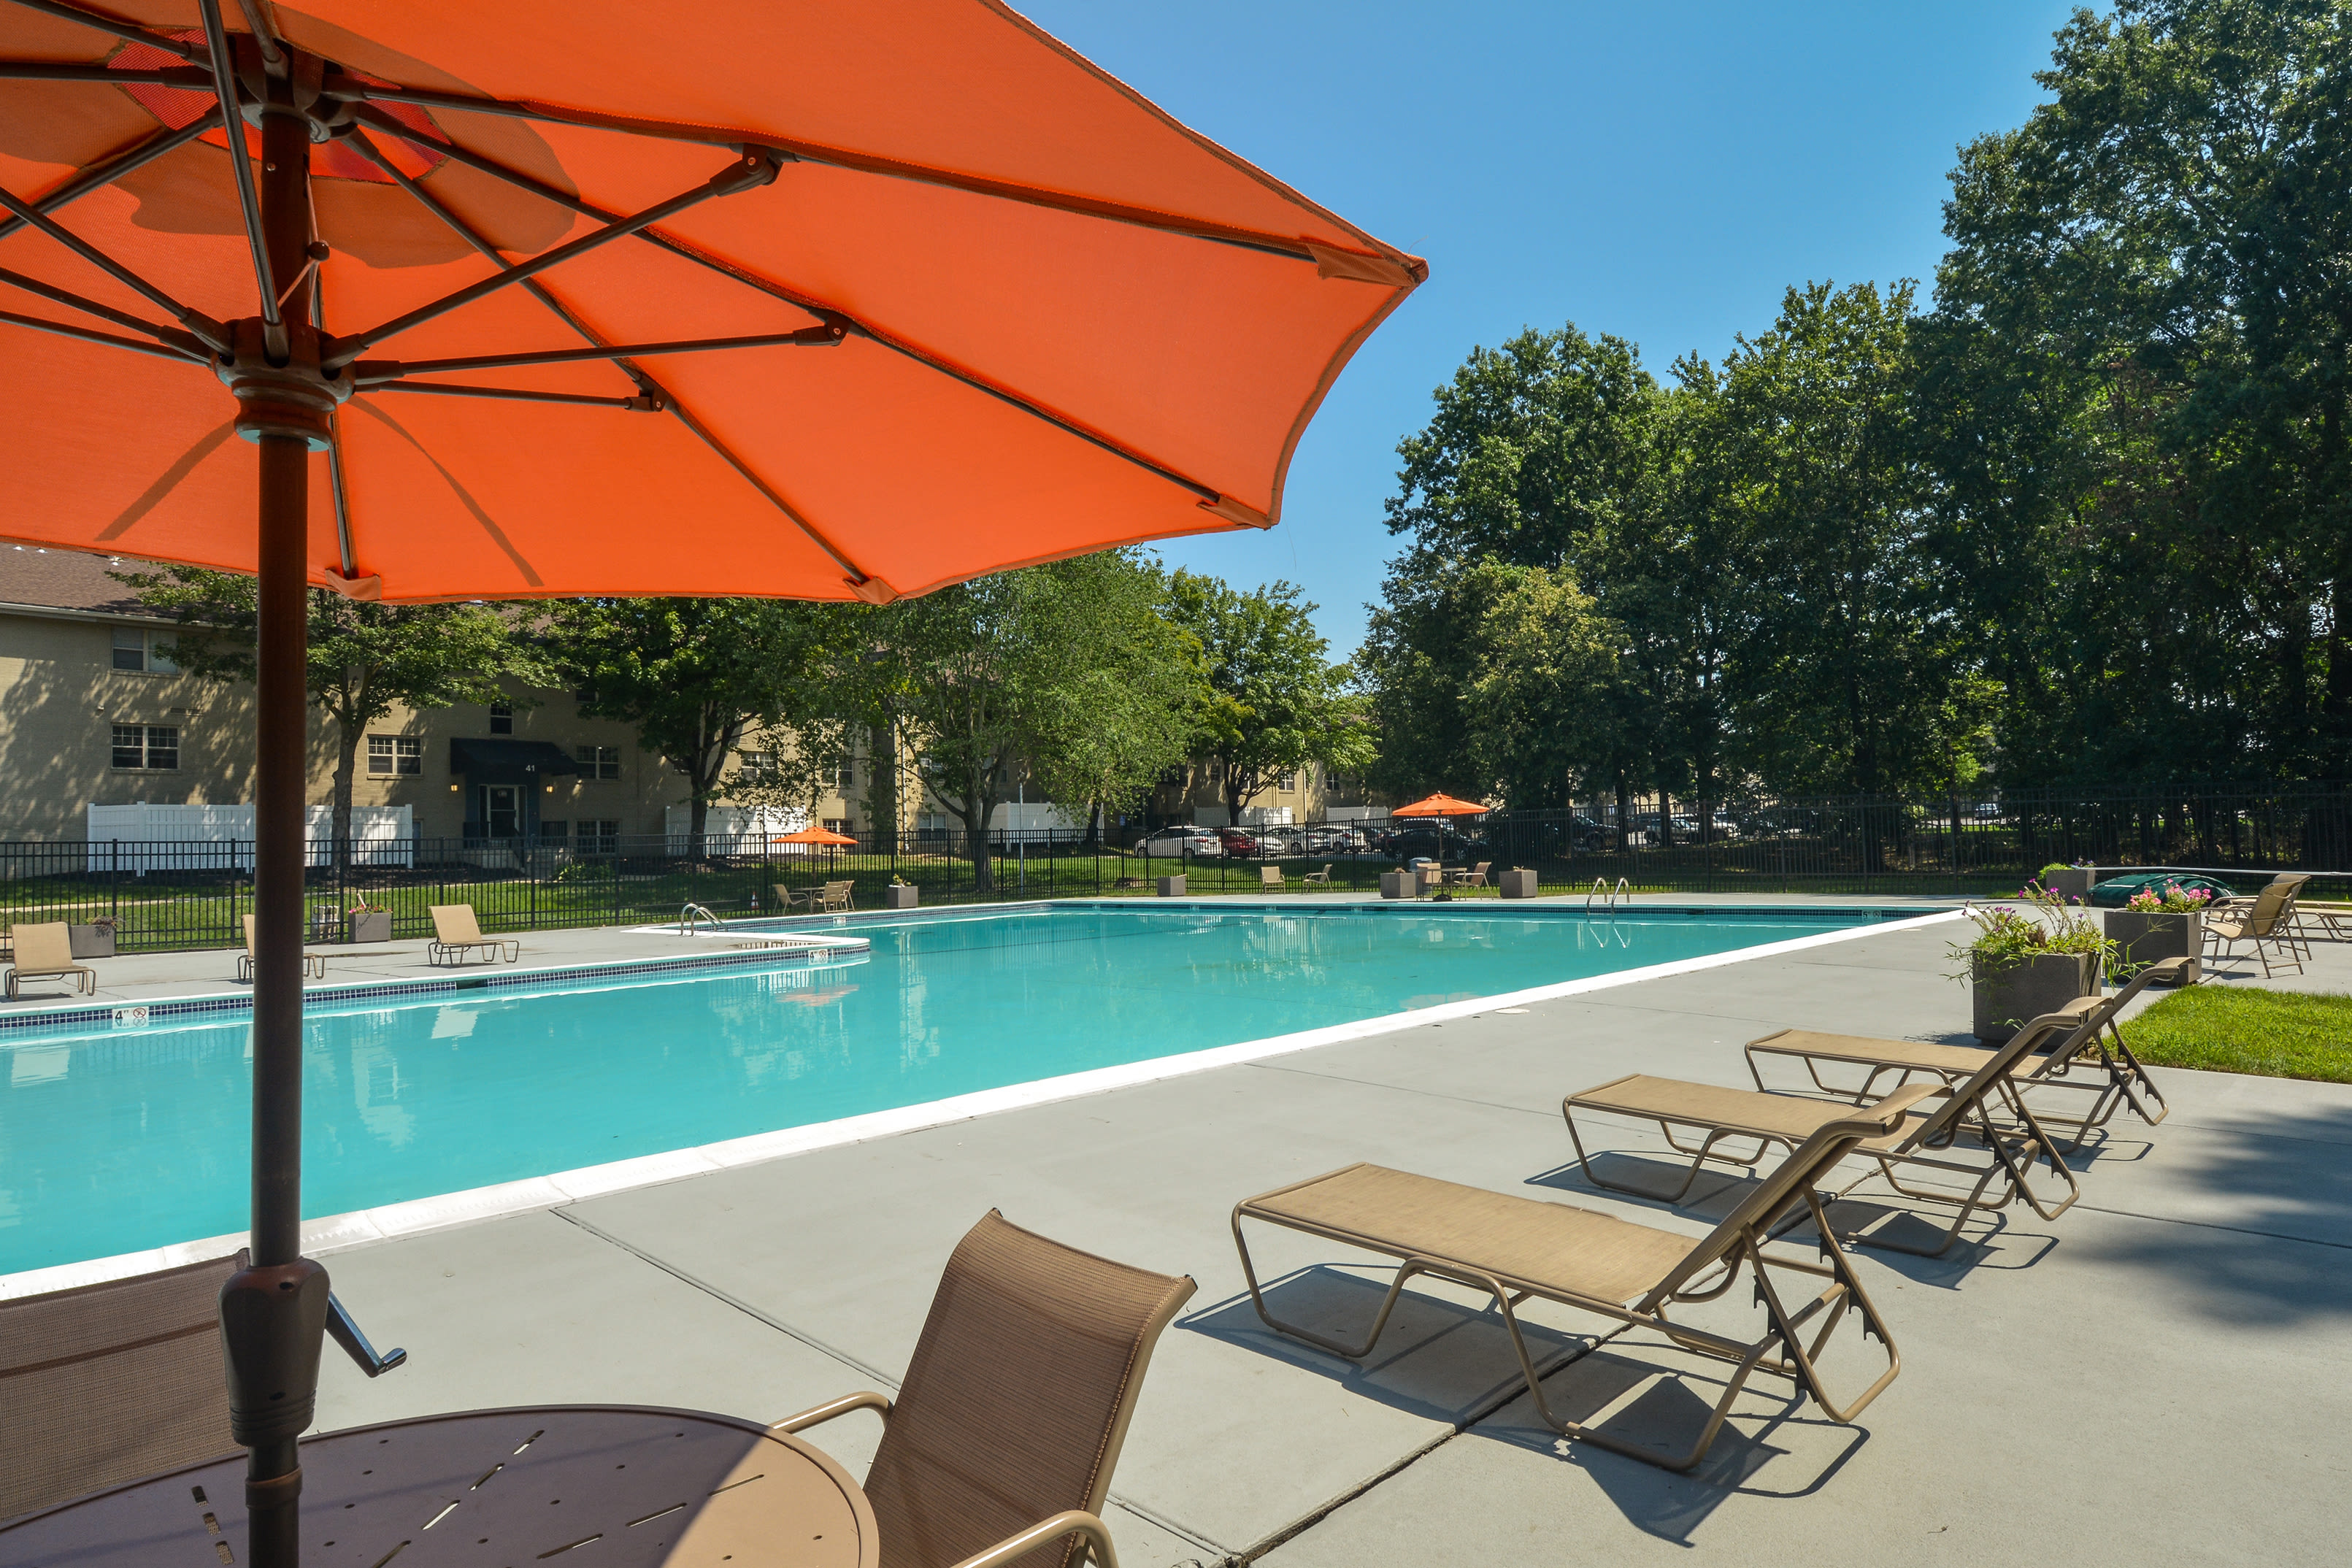 Sparkling pool with lounge chairs and umbrella at Hunters Crossing, Newark, Delaware